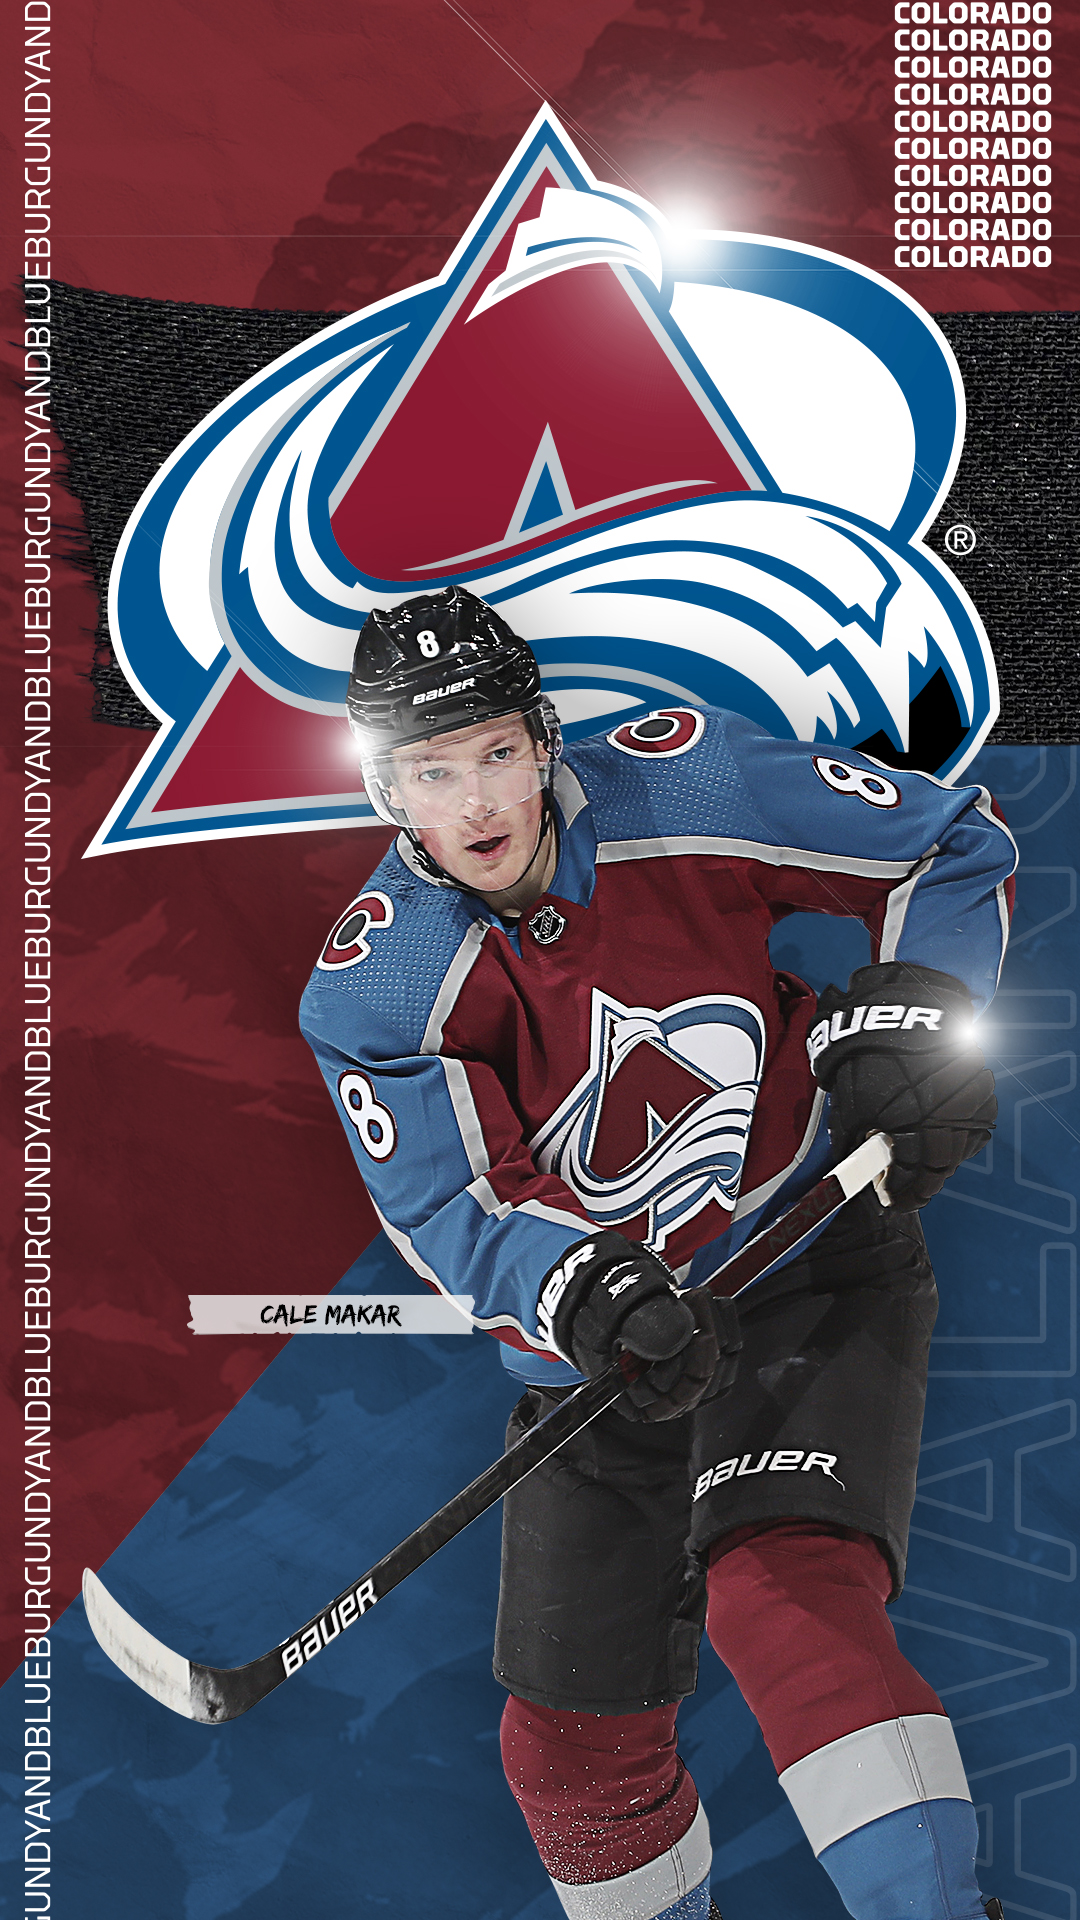 Colorado Avalanche on X: How is this for #WallpaperWednesday